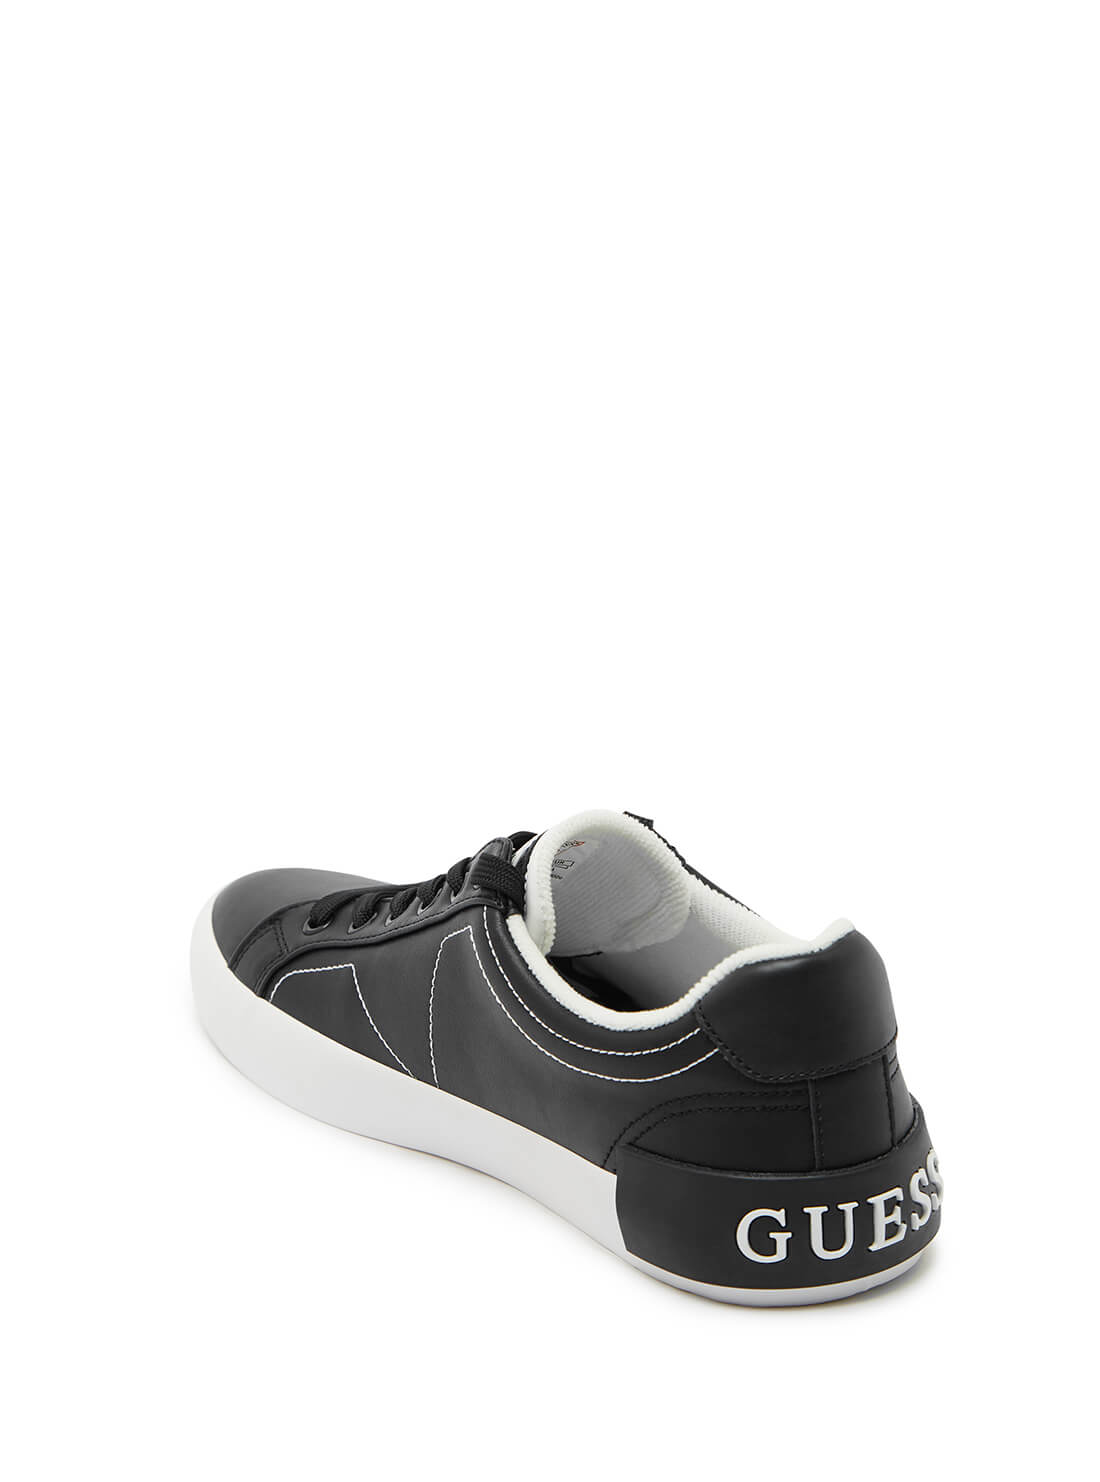 GUESS Mens Black Logo Pisco Low-Top Sneakers PISCO-A Back View